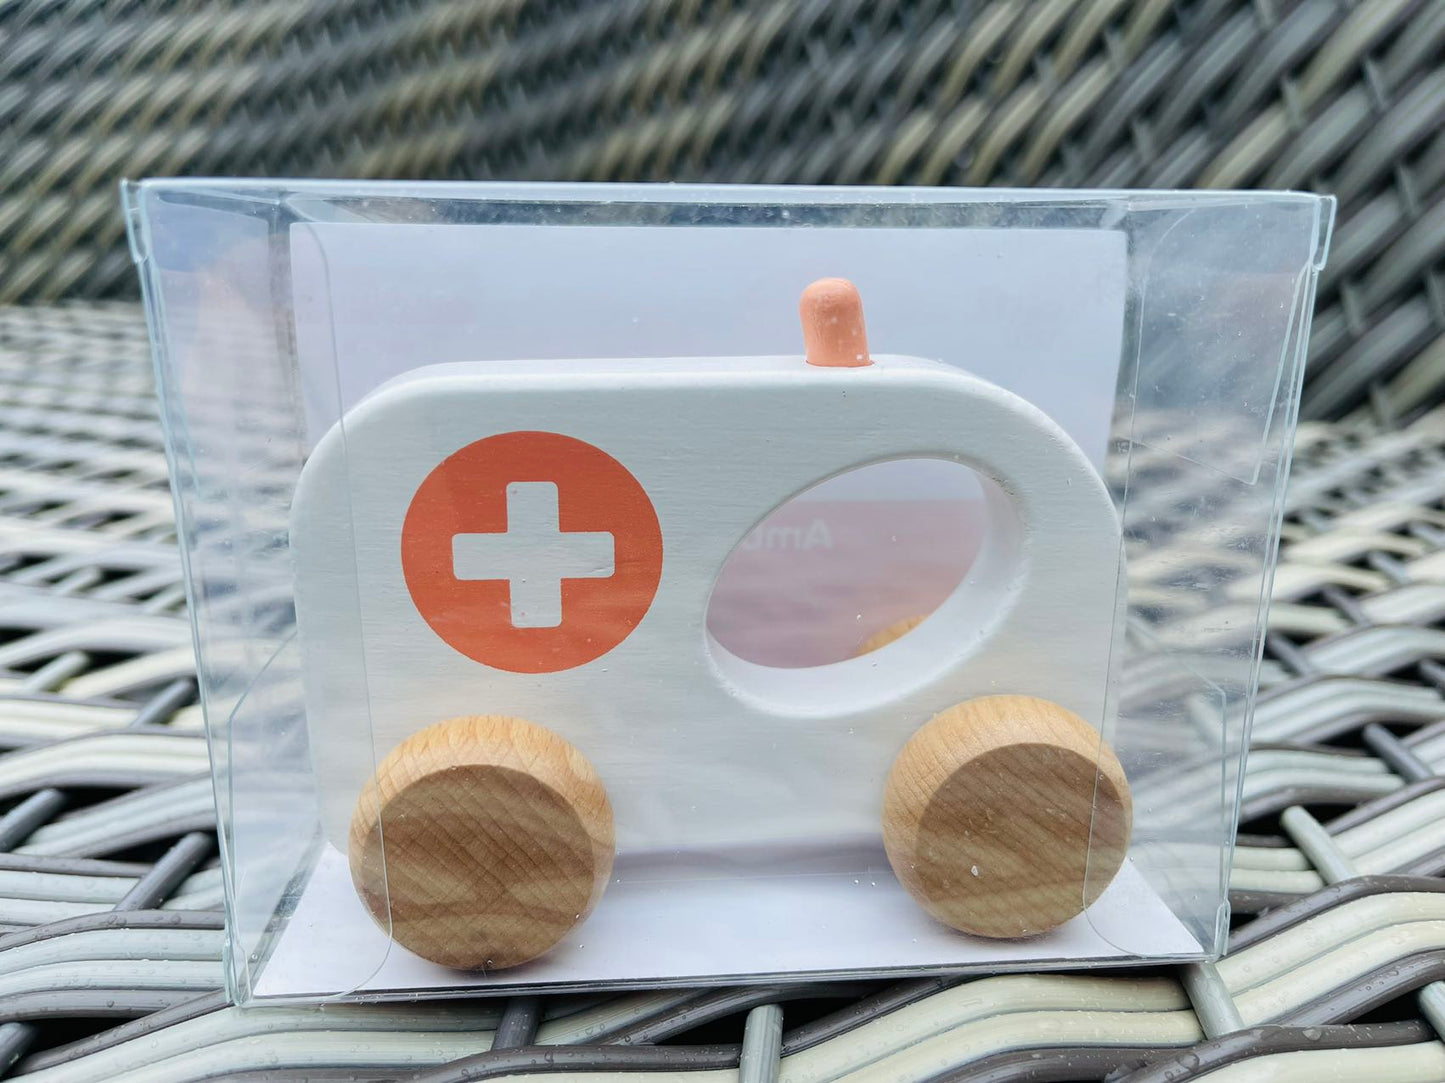 Tooky-Toy-Wooden-Roller-Ambulance-Macarons-Colour-Medium-Size